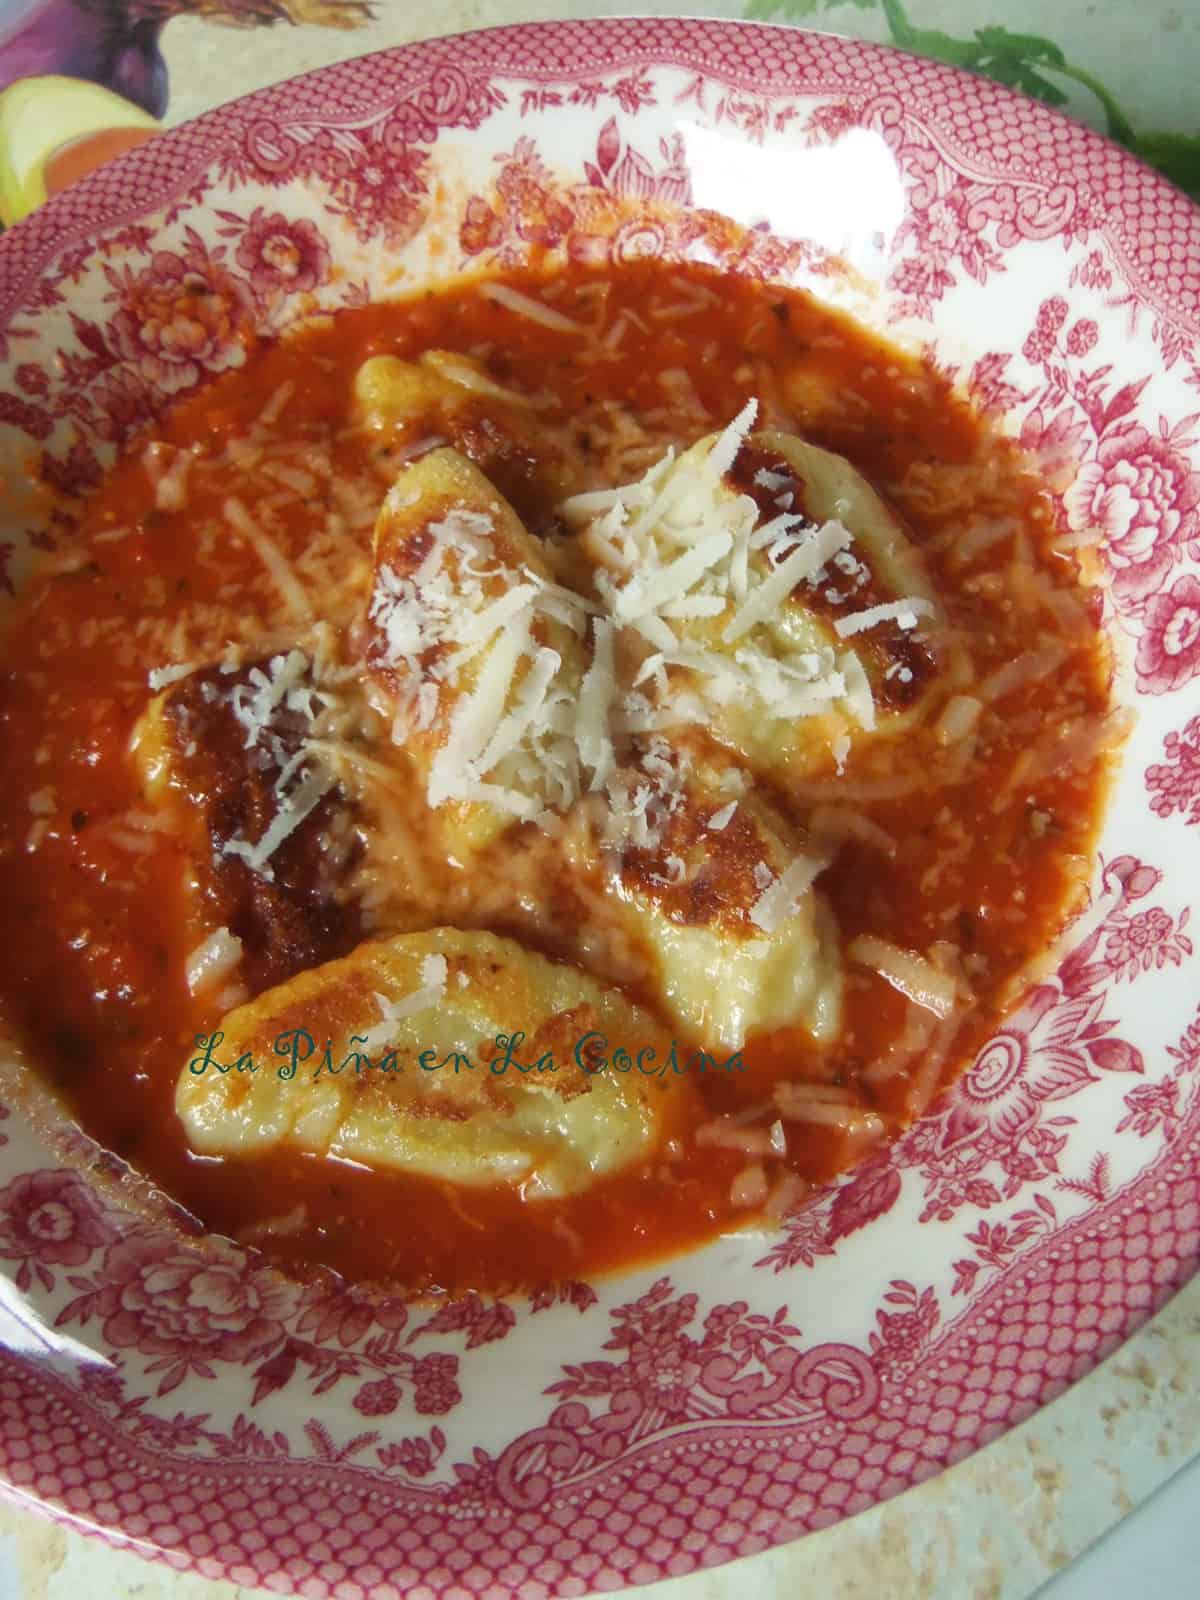 Potato Gnocchi with extra Parmesan in a Spicy Red Sauce.